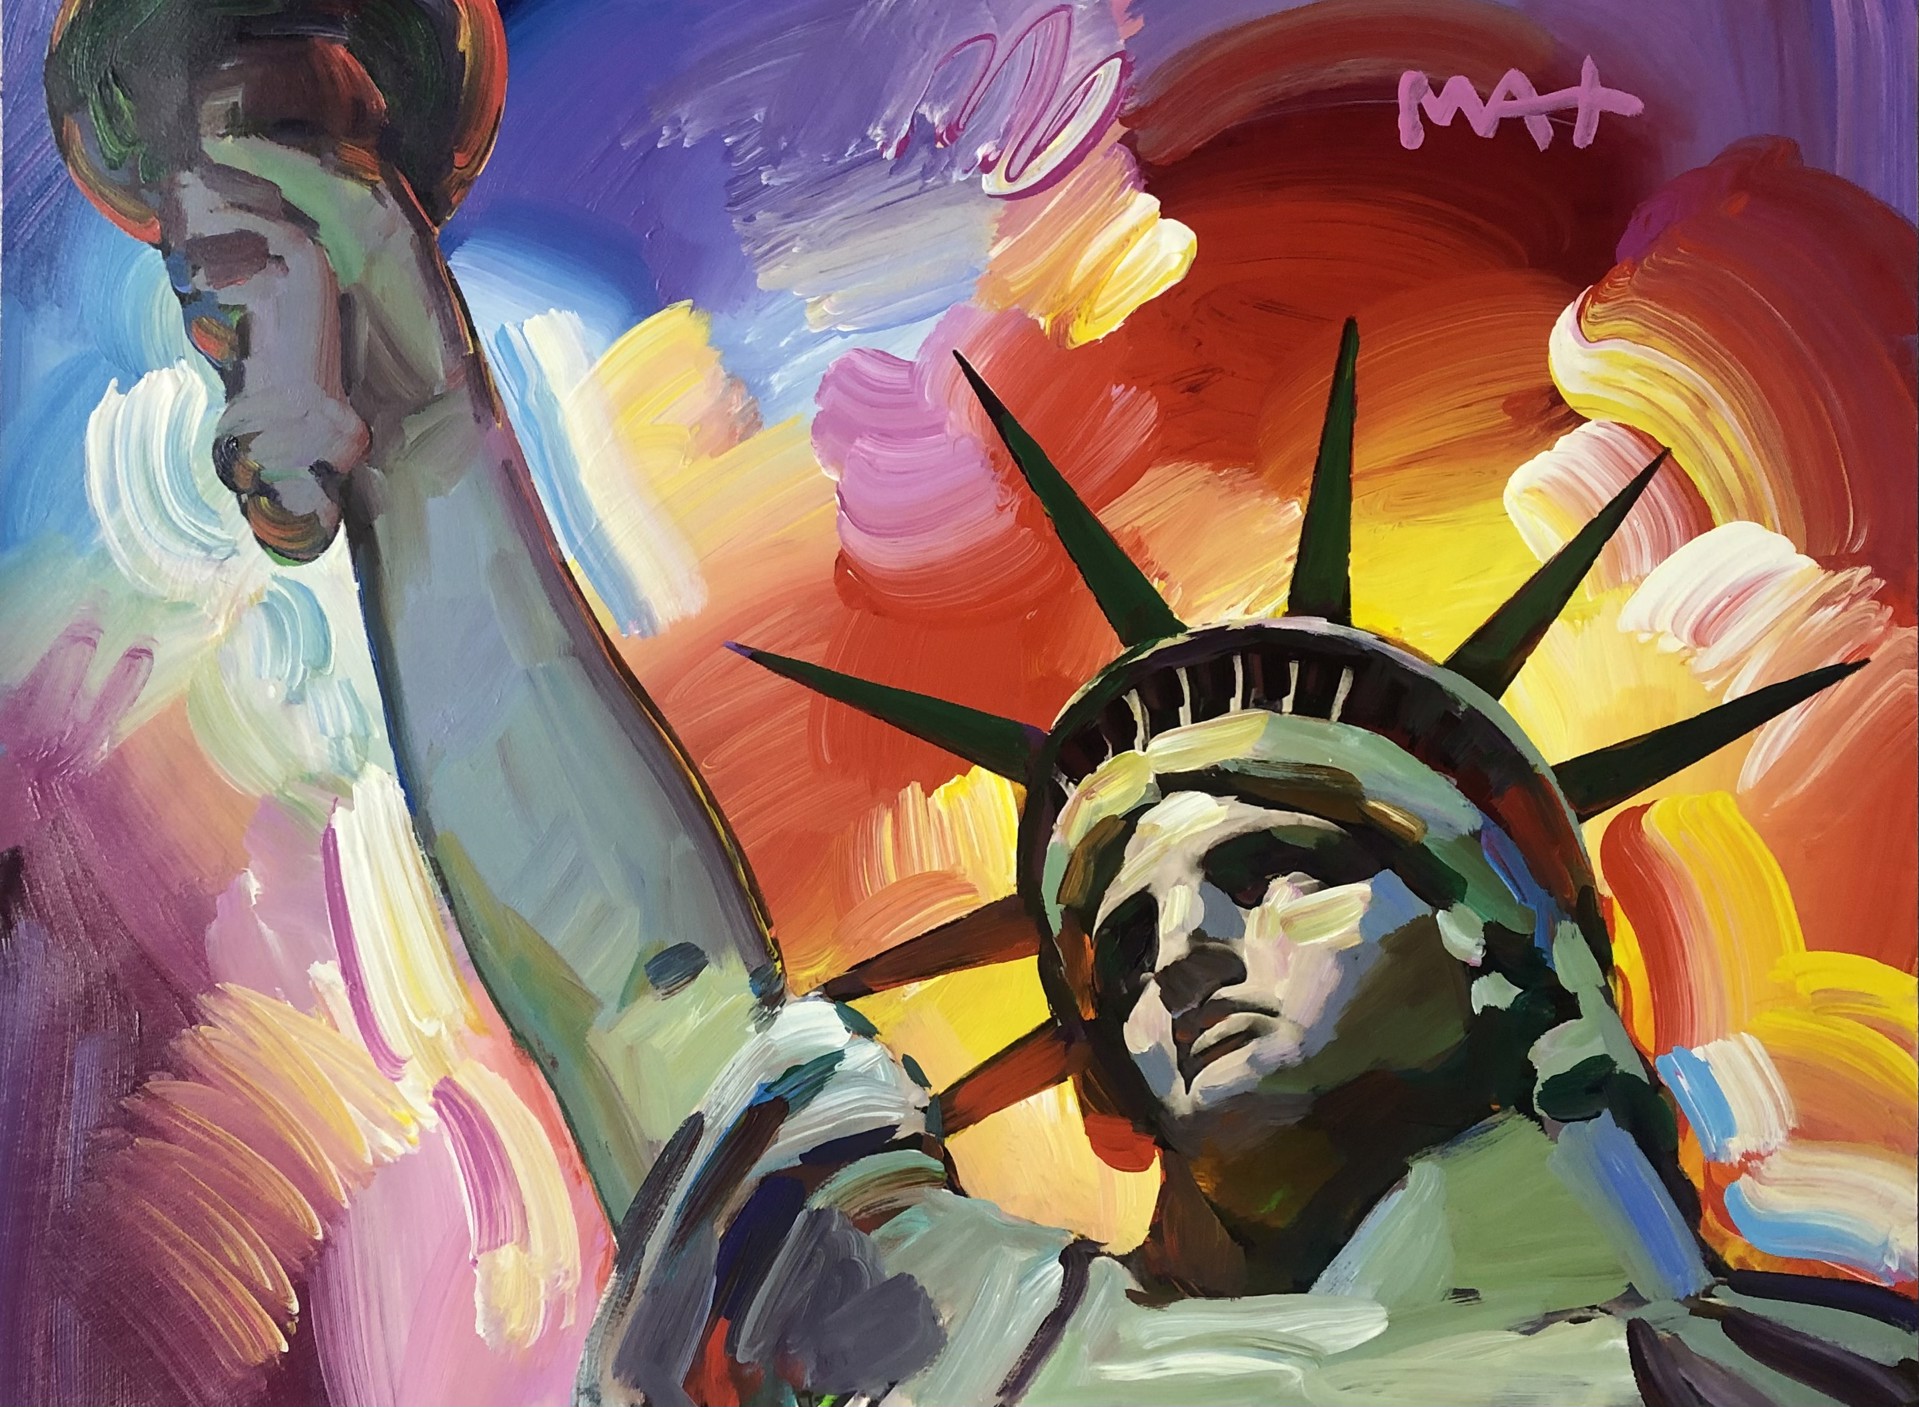 Statue of Liberty (Fireworks) by Peter Max